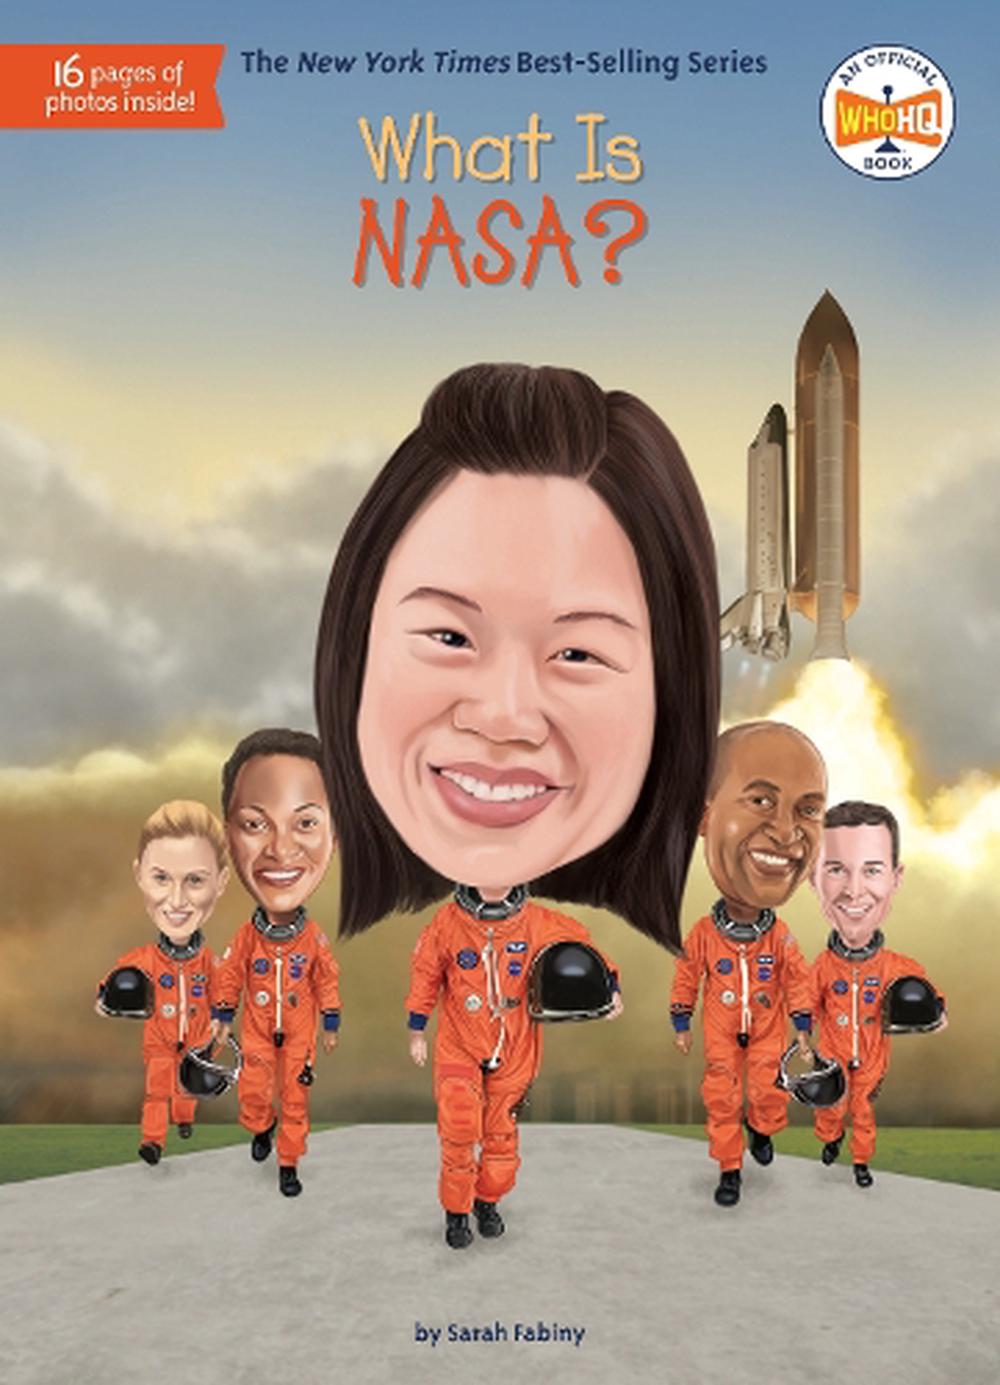 what-is-nasa-by-sarah-fabiny-hardcover-9781524786052-buy-online-at